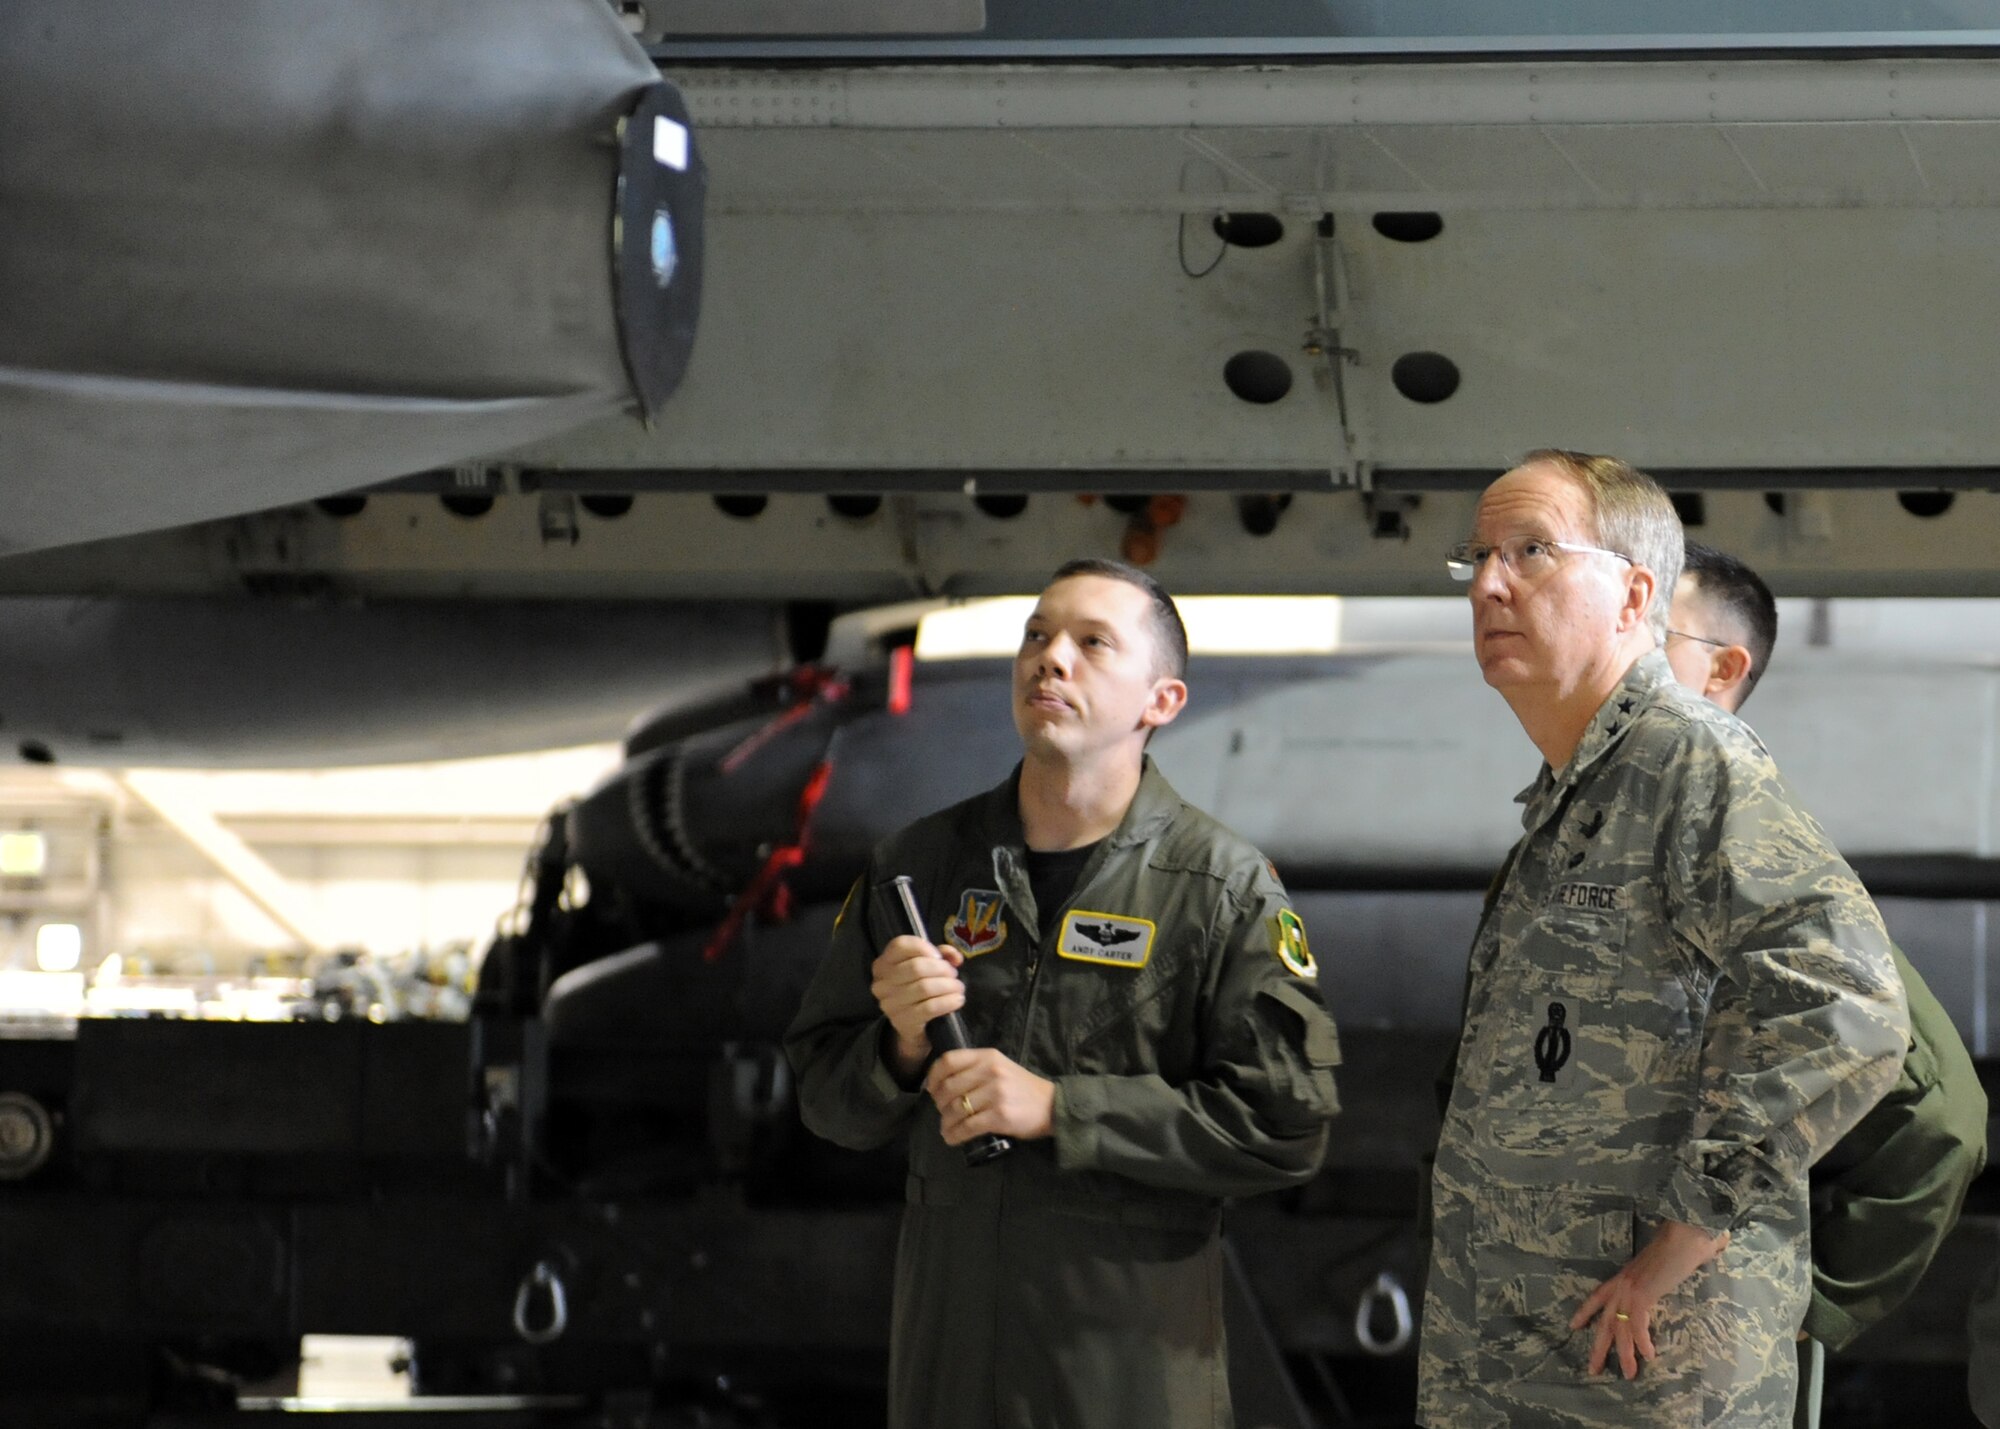 MINOT AIR FORCE BASE, N.D. -- Lt. Gen. Frank G. Klotz, Global Strike Command commander, discusses the capabilities of a B-52H Stratofortress with Maj. Andy Carter, 23rd Bomb Squadron radar navigator, here, Oct. 28. The general is here to meet members of Minot AFB and the local community. He is scheduled to be the featured speaker at the Minot Chamber of Commerce annual meeting and luncheon in Minot Oct. 29. (U.S. Air Force photo by Staff Sgt. Keith Ballard)